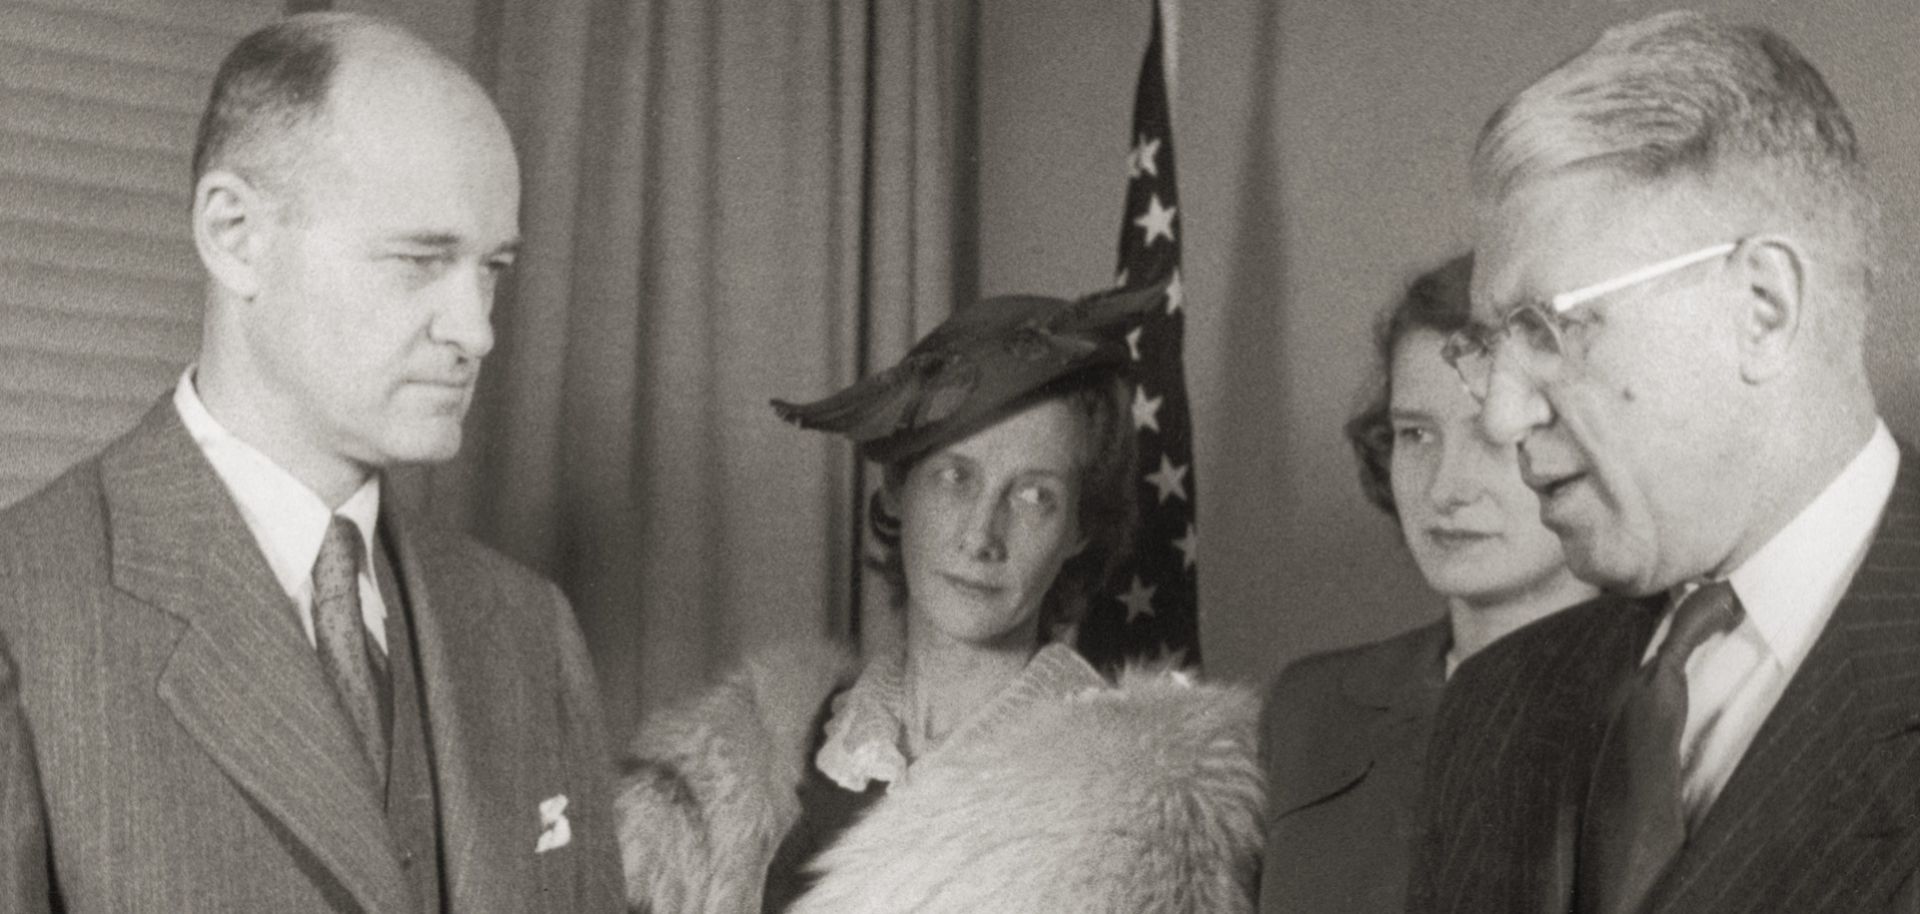 U.S. diplomat and historian George F. Kennan (1904 - 2005, left) is sworn in as ambassador to the Soviet Union by Raymond Muir, as Kennan's wife and daughter look on.